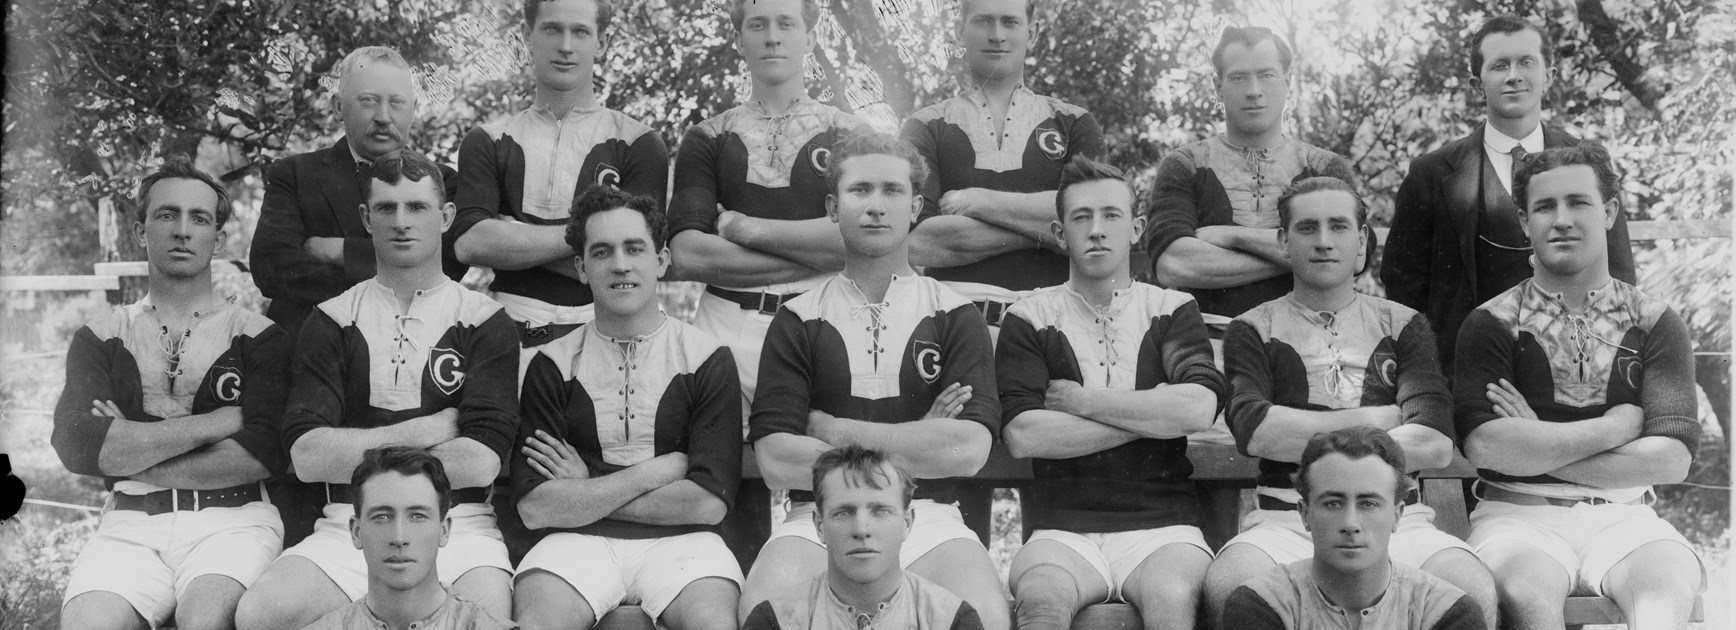 The Glebe players that went on strike in 1917 and were tagged “The Rebels”. Burge is seated at the centre of the middle row.